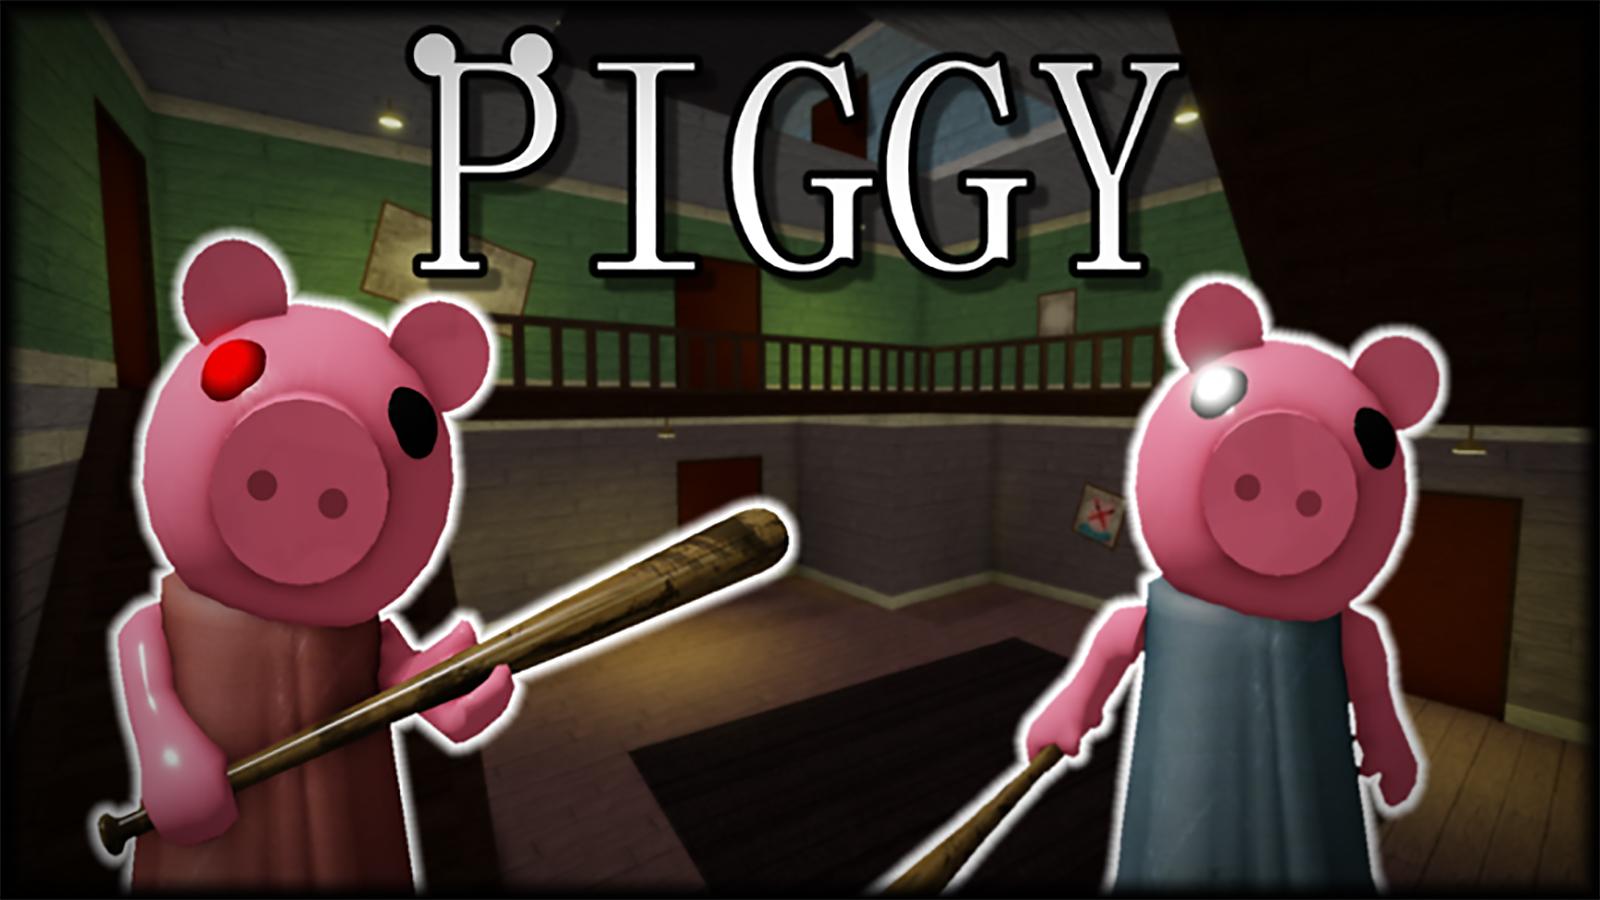 Artowork for the Piggy scary horror game in Roblox